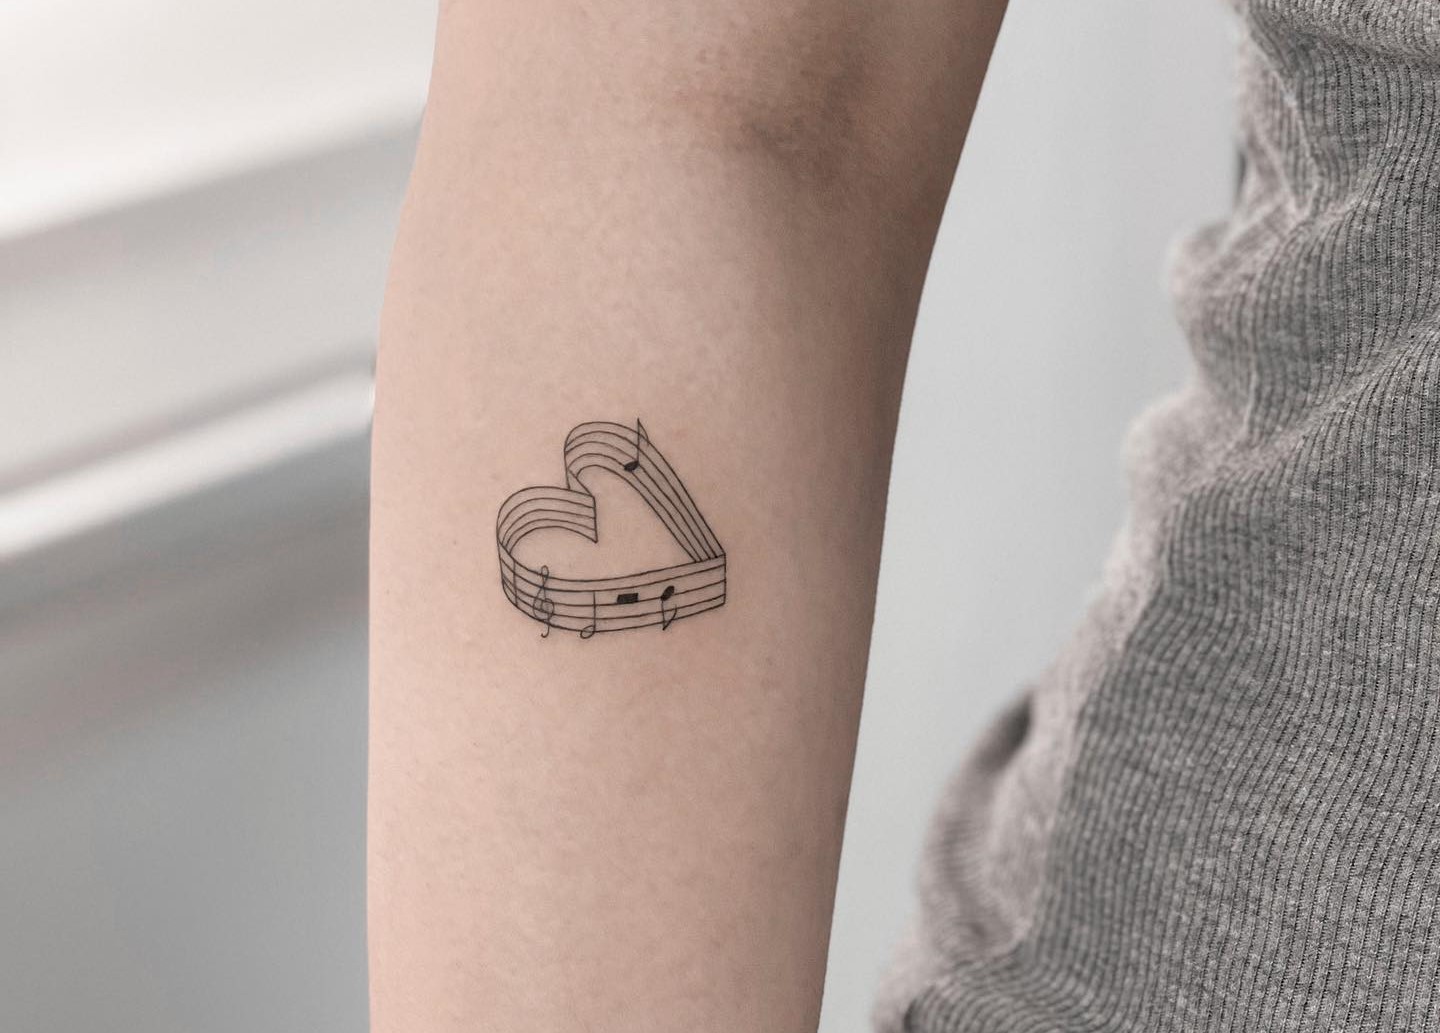 ELLE Australia  26 fine line tattoo ideas your inner minimalist is going  to froth  More here httpbitly2prB2gh  Facebook